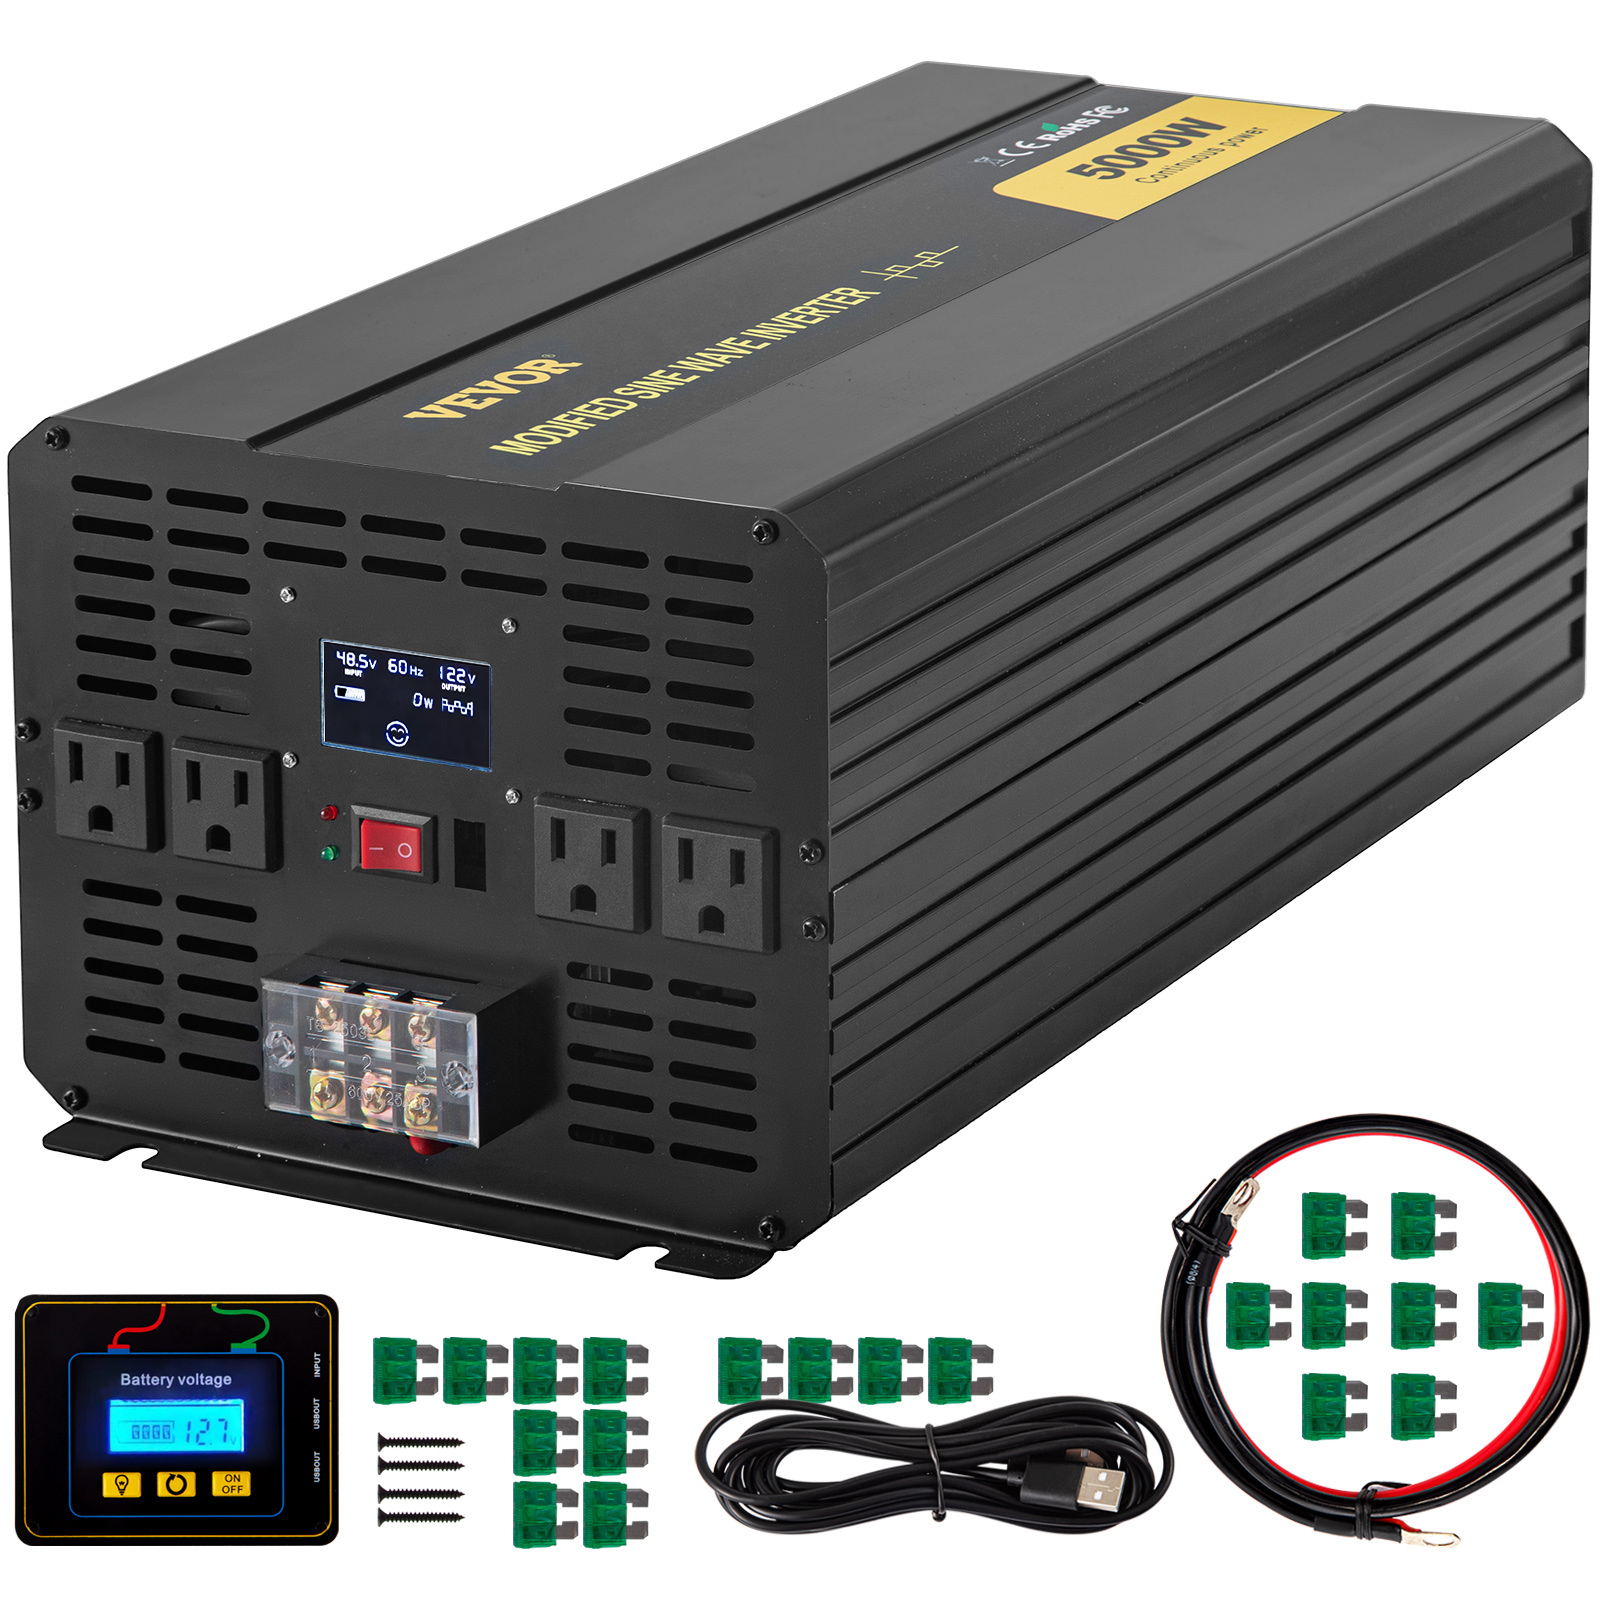 All-in-one Inverter Built in 5000W 48V Pure Sine Wave Power